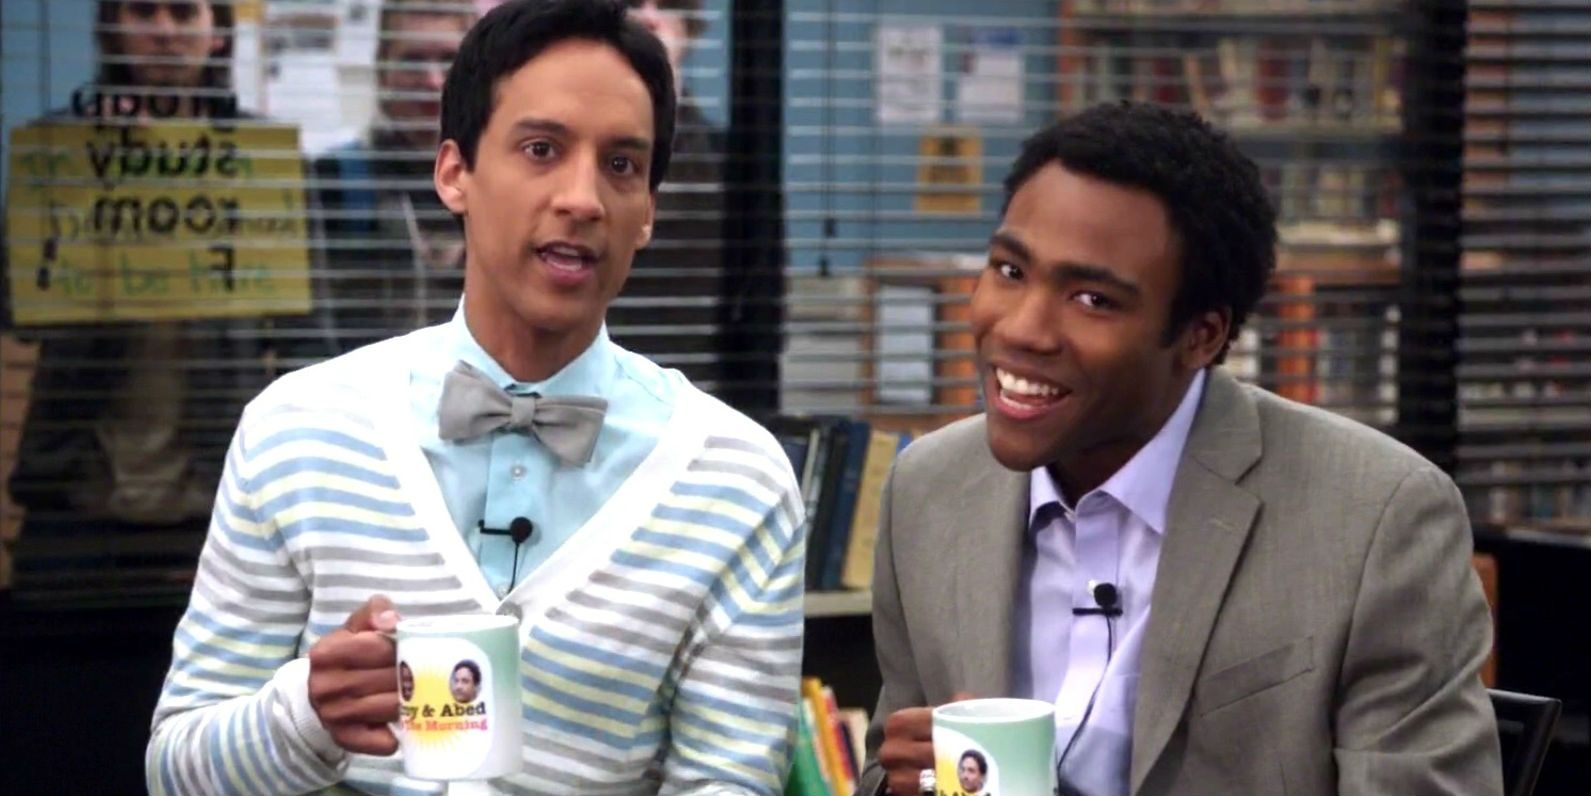 Community - Troy and Abed